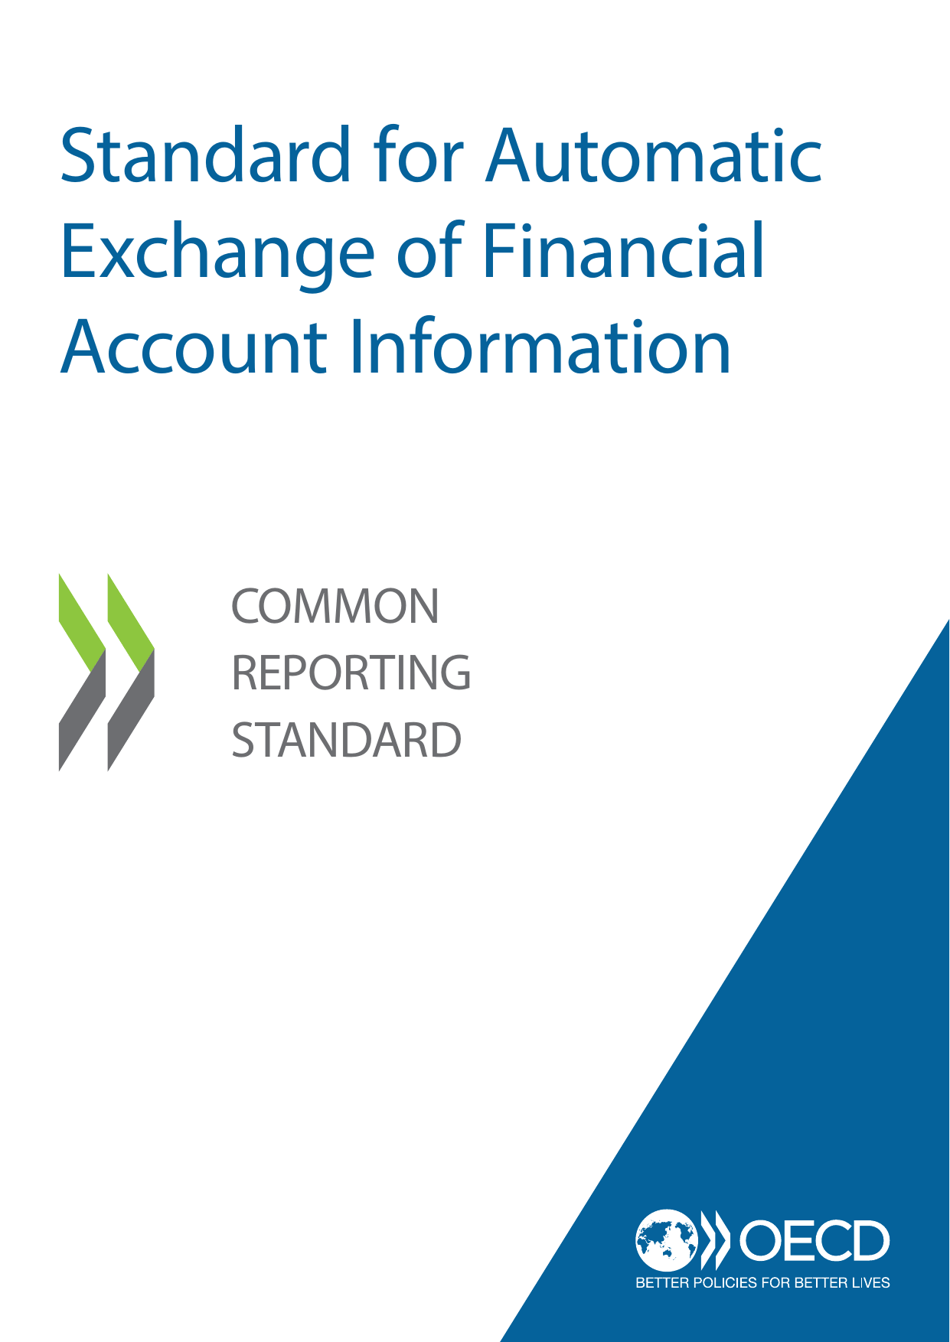 Standard for Automatic Exchange of Financial Account Information - OECD Logo